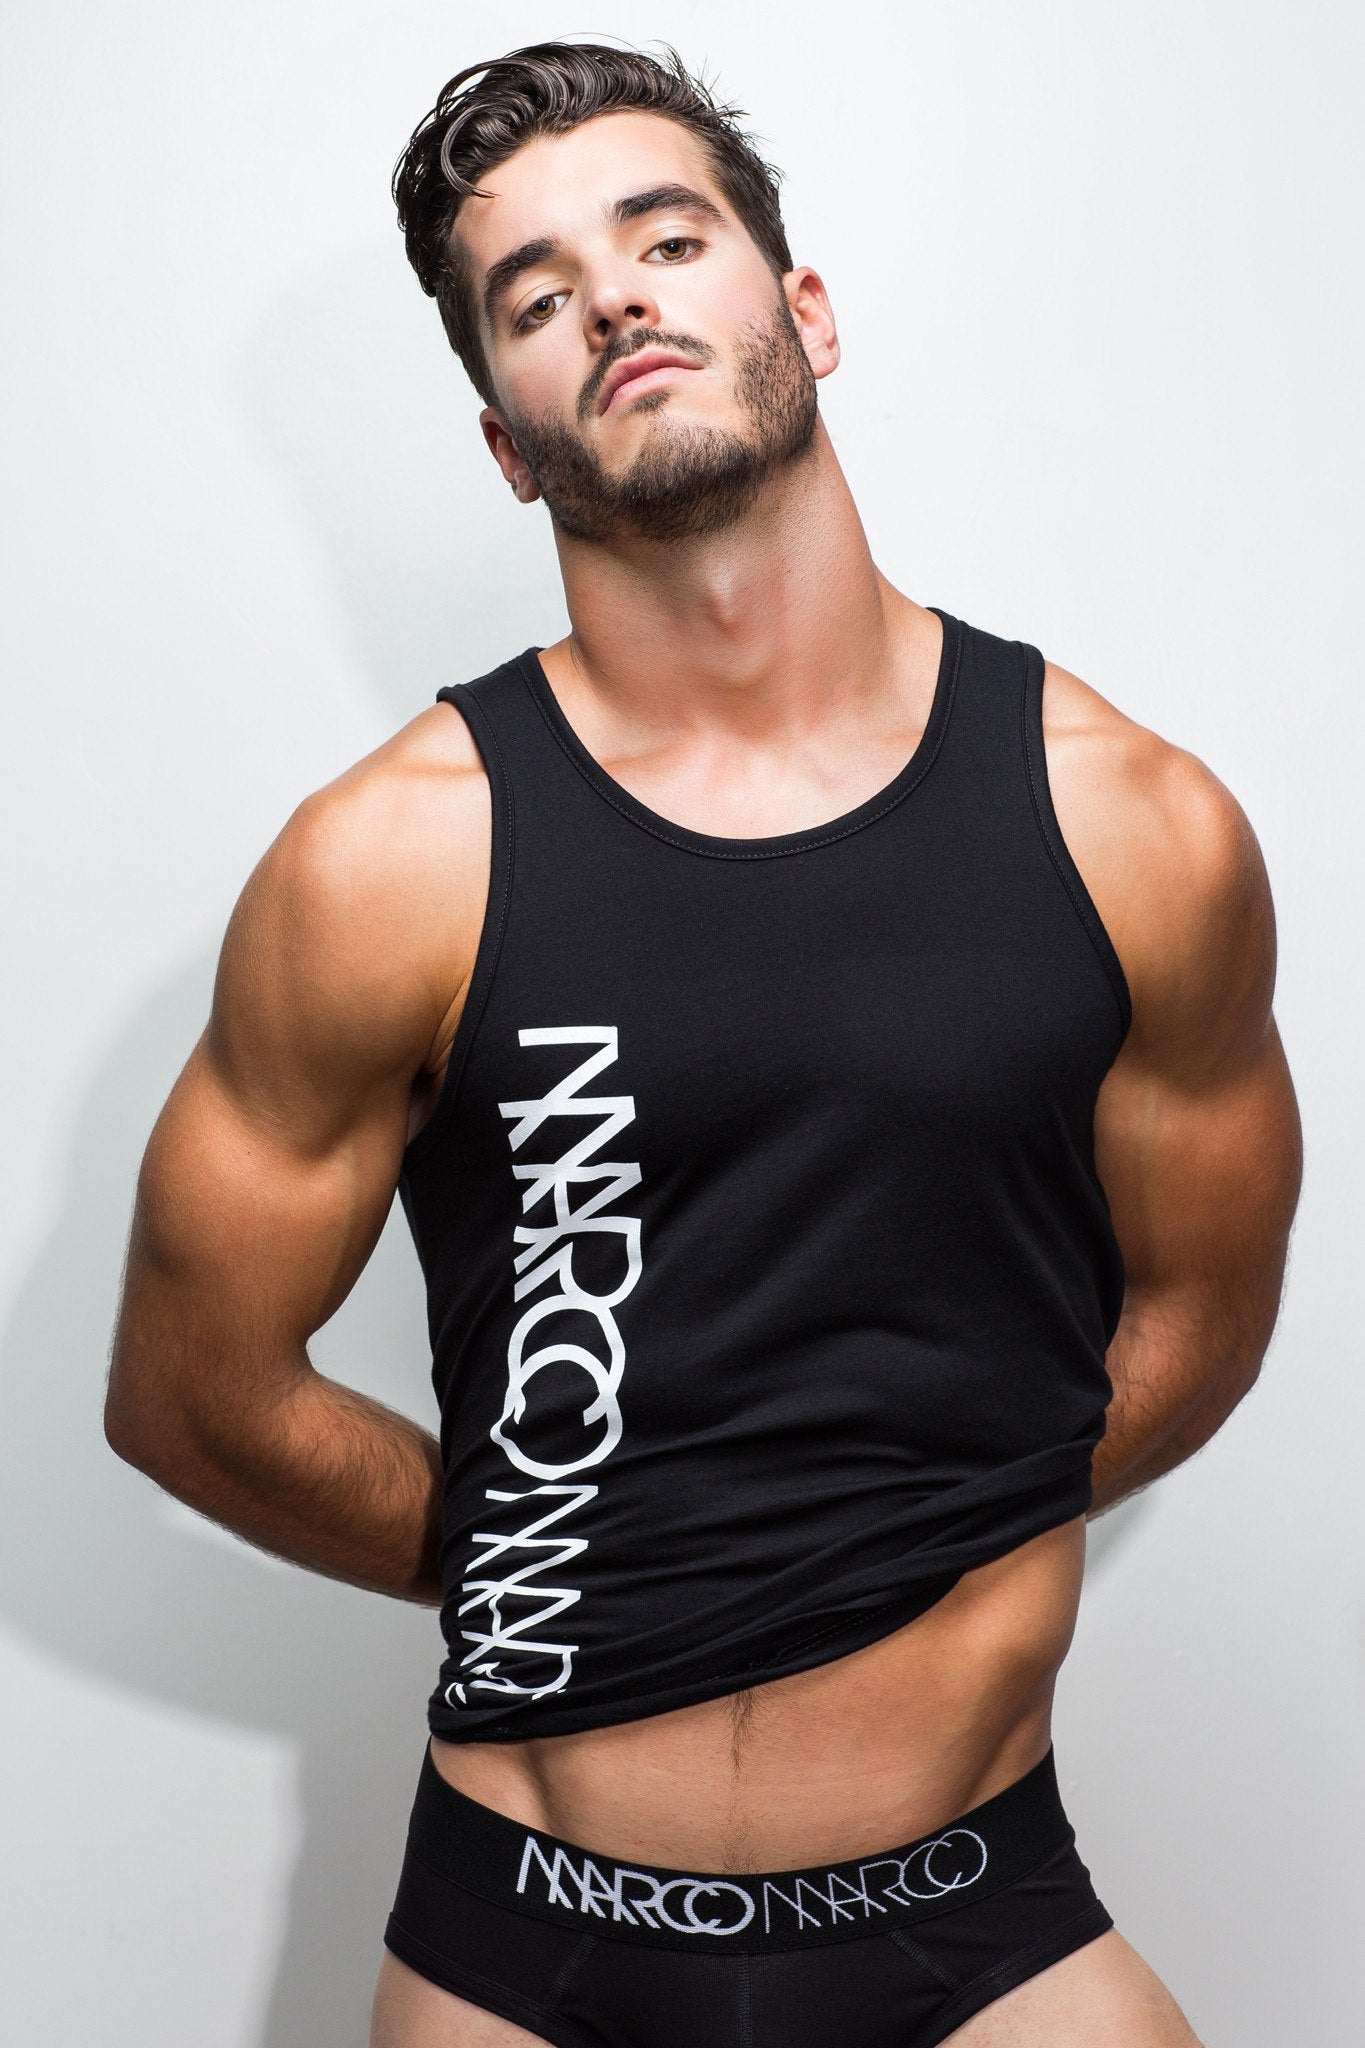 Marco Marco Tank Top - Large